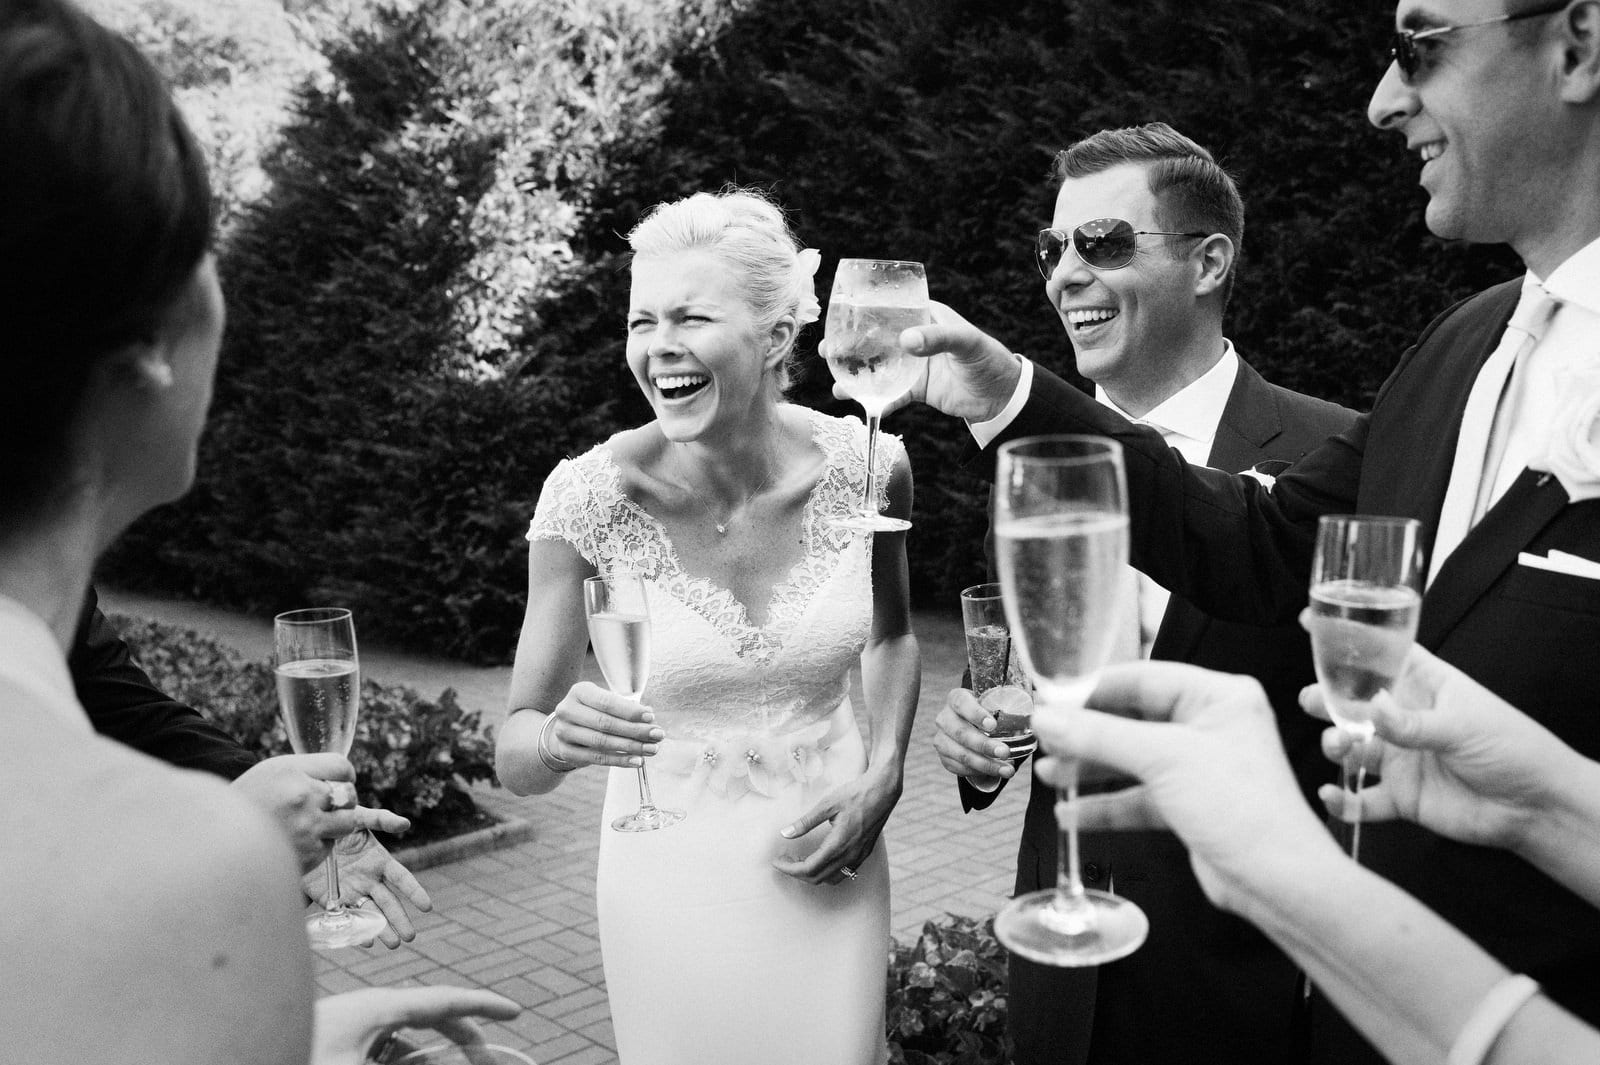 A bride and groom laugh as they hold champagne flutes for a toast on a patio after their wedding at the Omni Bedford Springs resort.